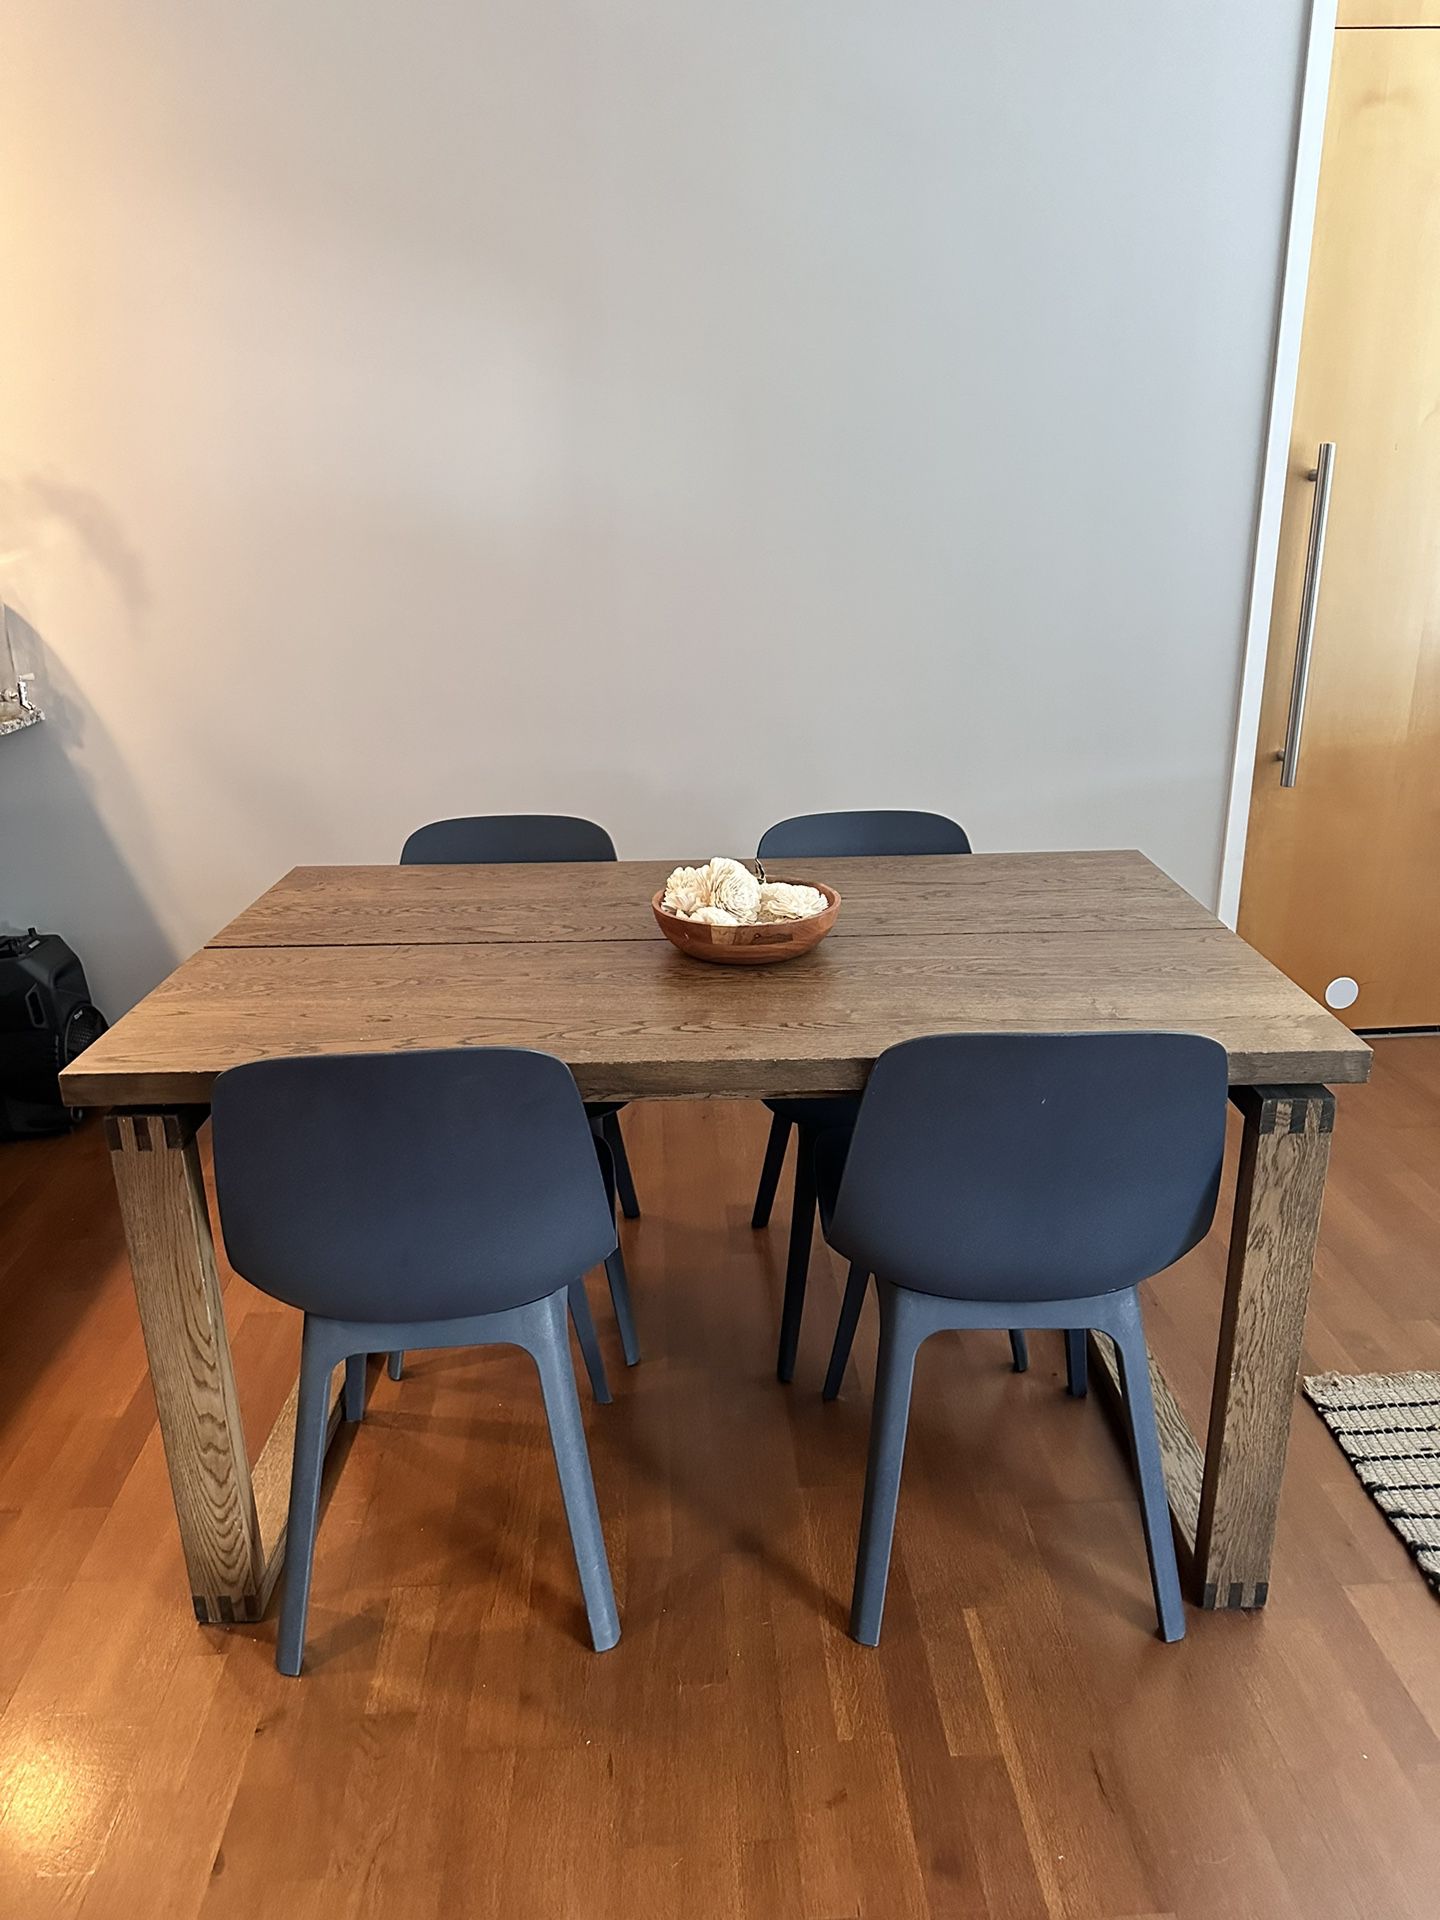 Dining table From IKEA